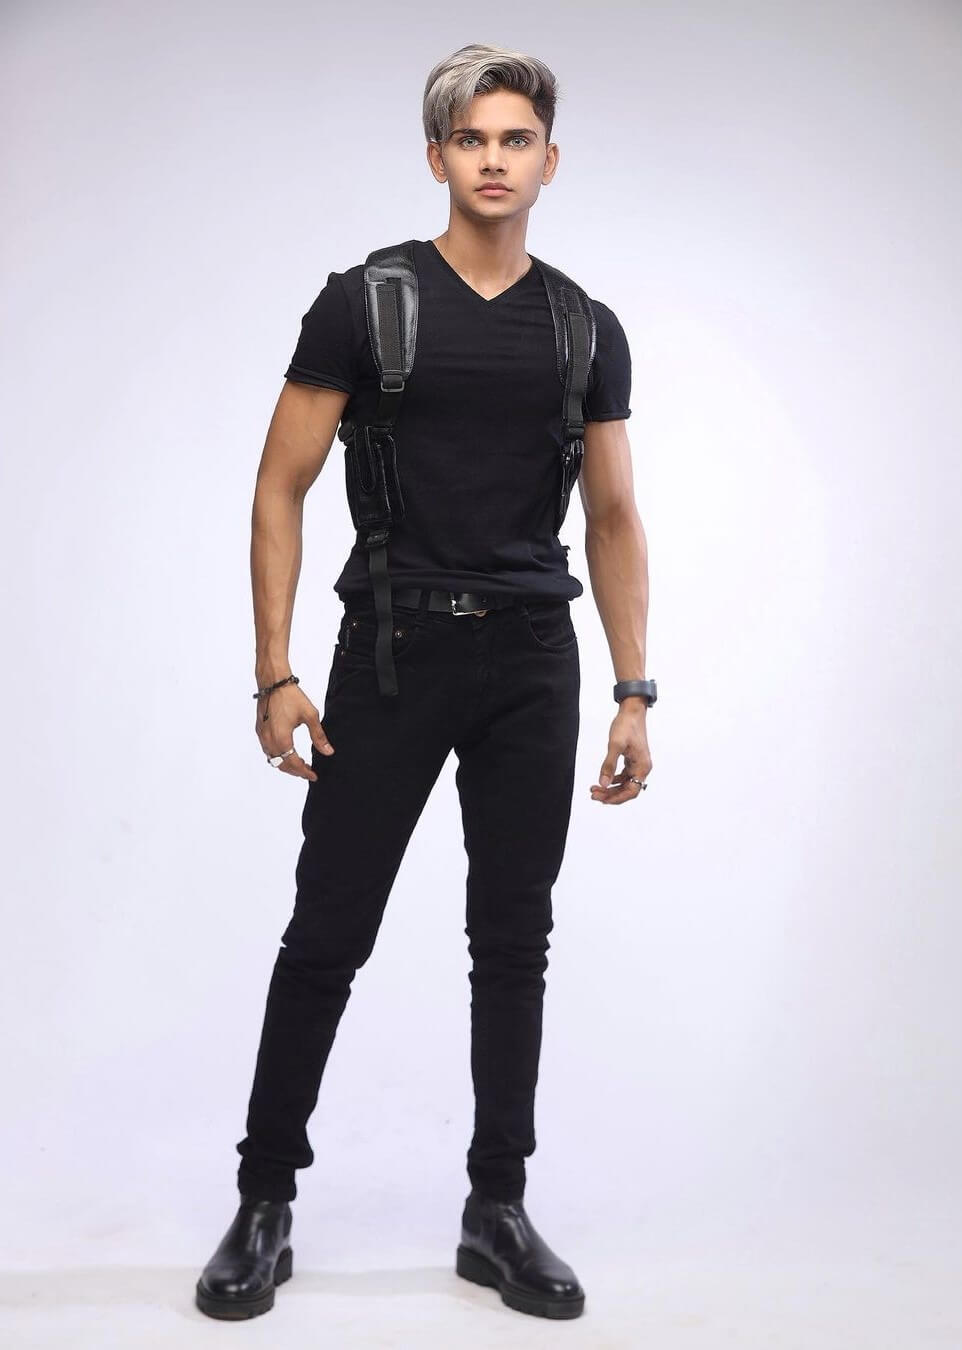 Lucky Dancer In Black T-shirt with Jeans